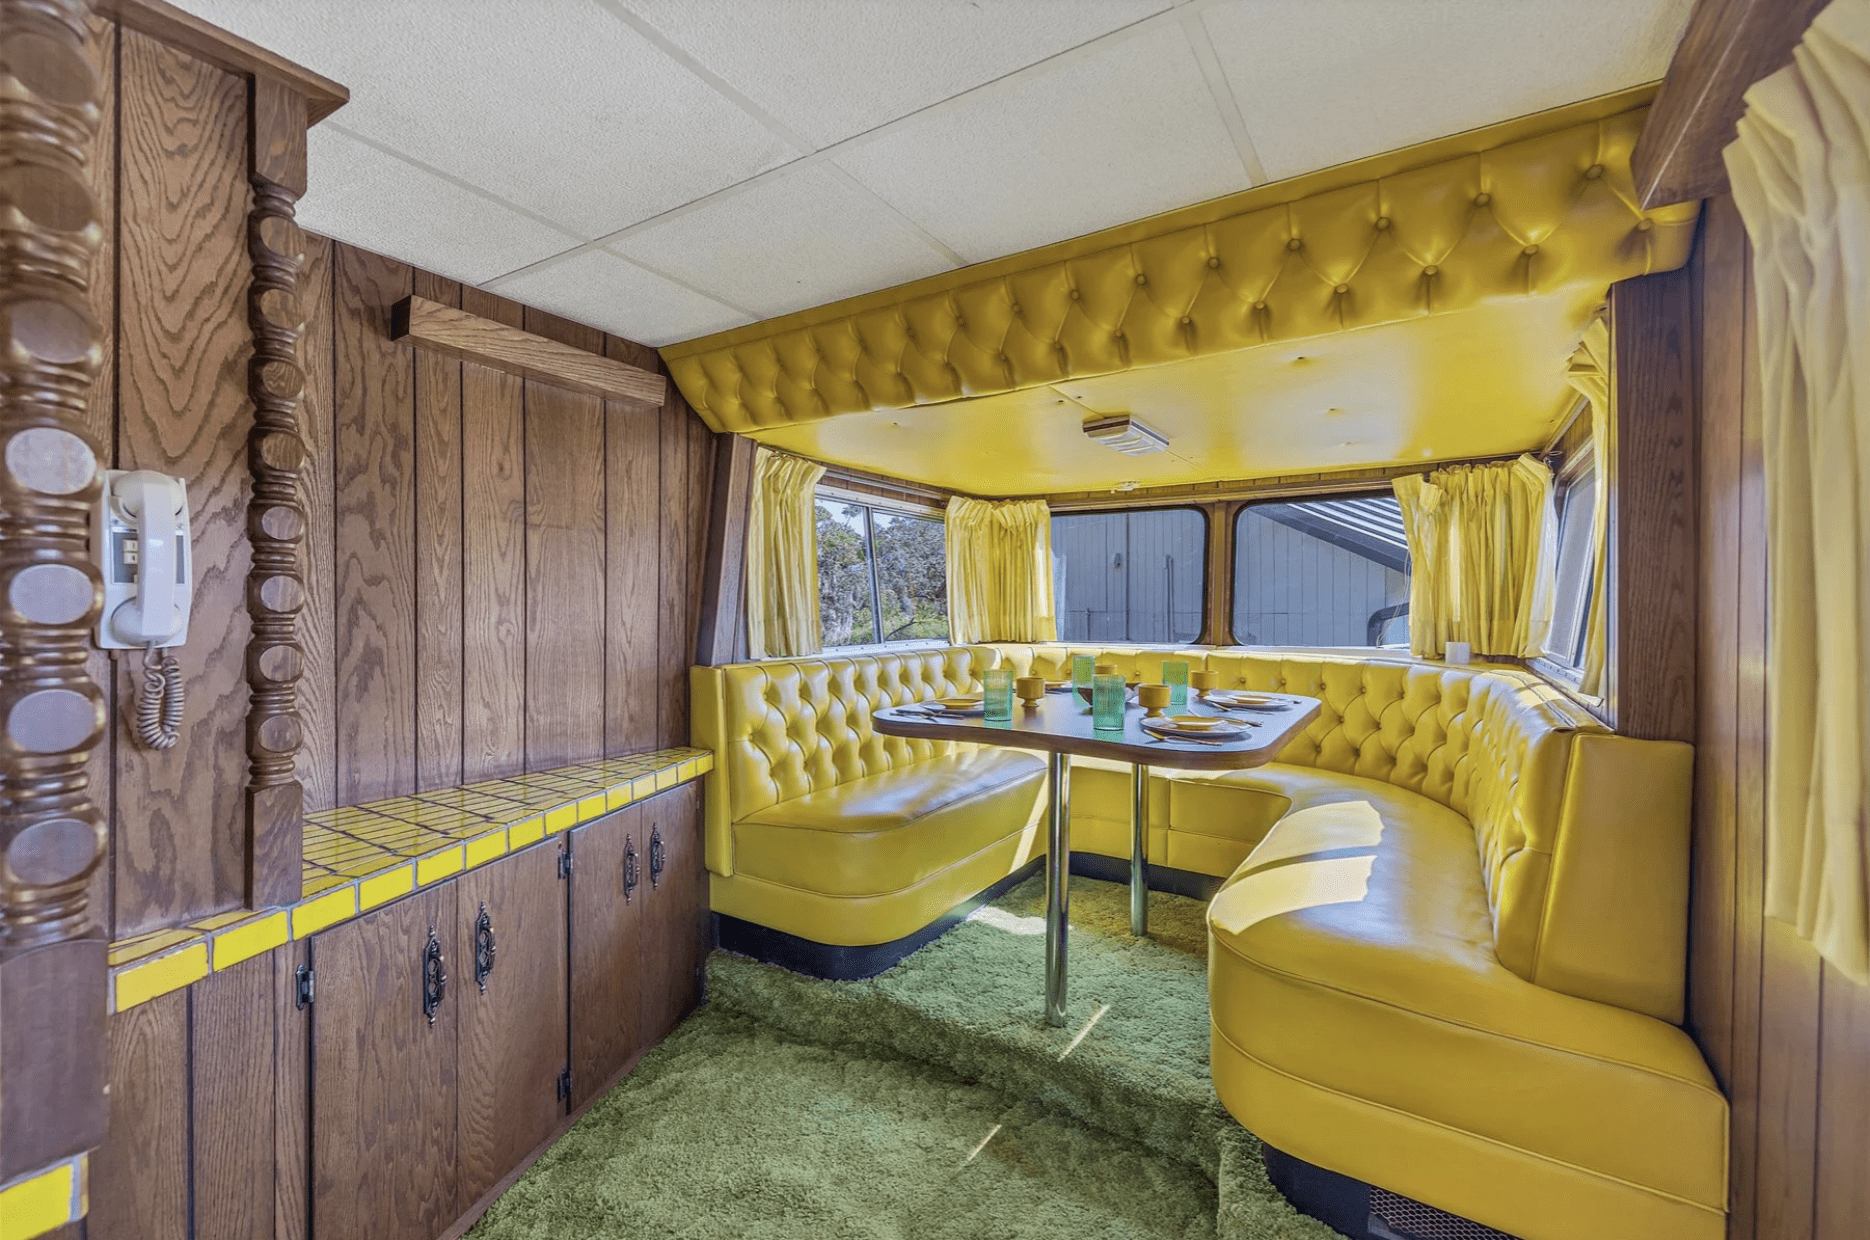 You Have to See the Inside of This ’70s Tractor-Trailer Motorhome